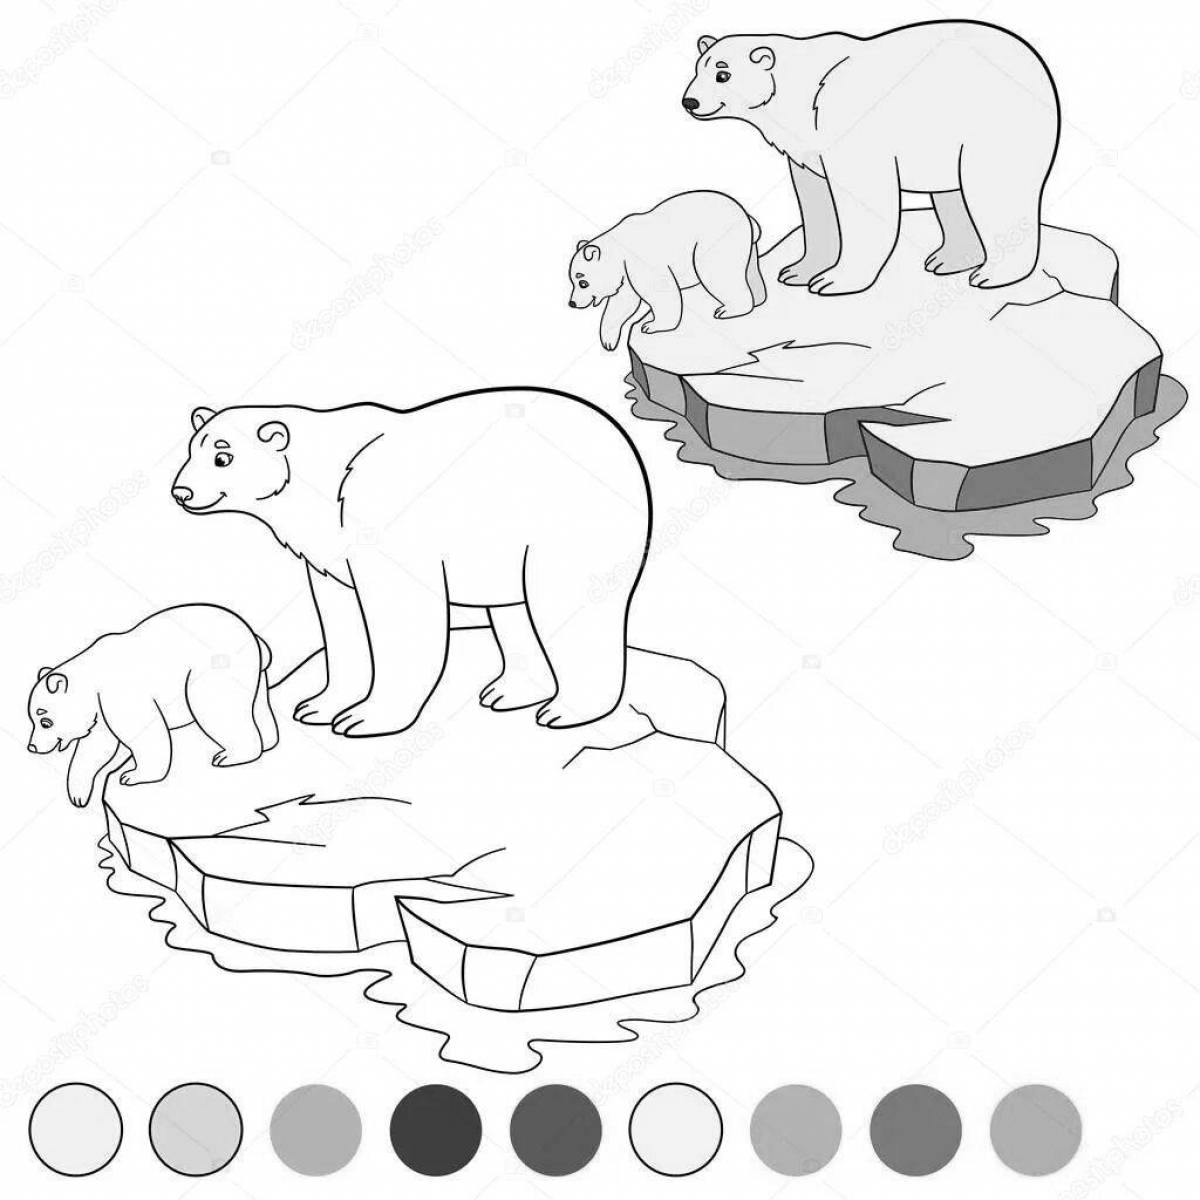 Exquisite polar bear coloring book for kids 5-6 years old